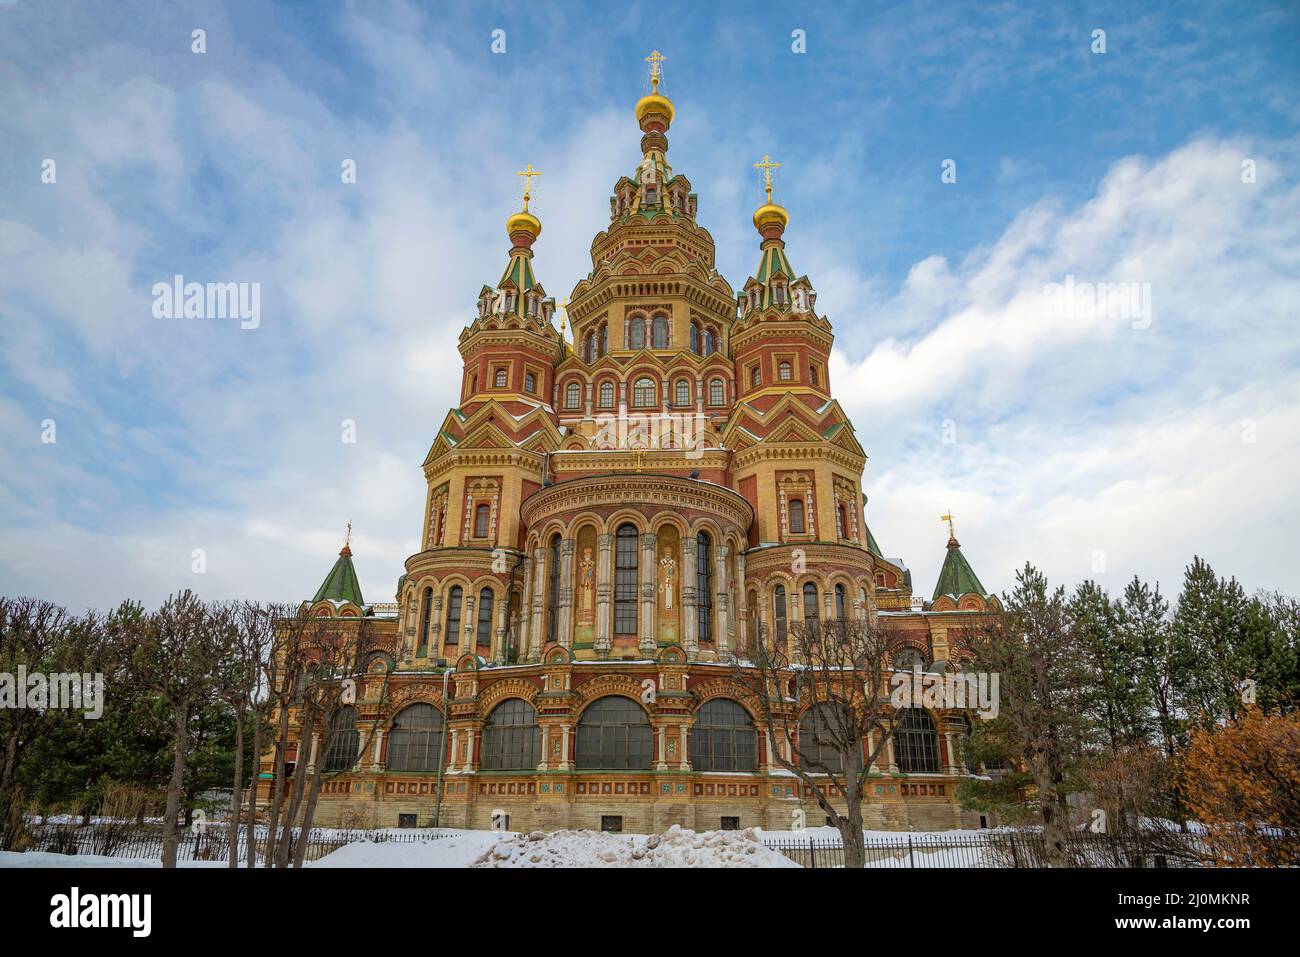 The ancient Cathedral of the Holy Apostles Peter and Paul, winter day. Peterhof, Russia Stock Photo